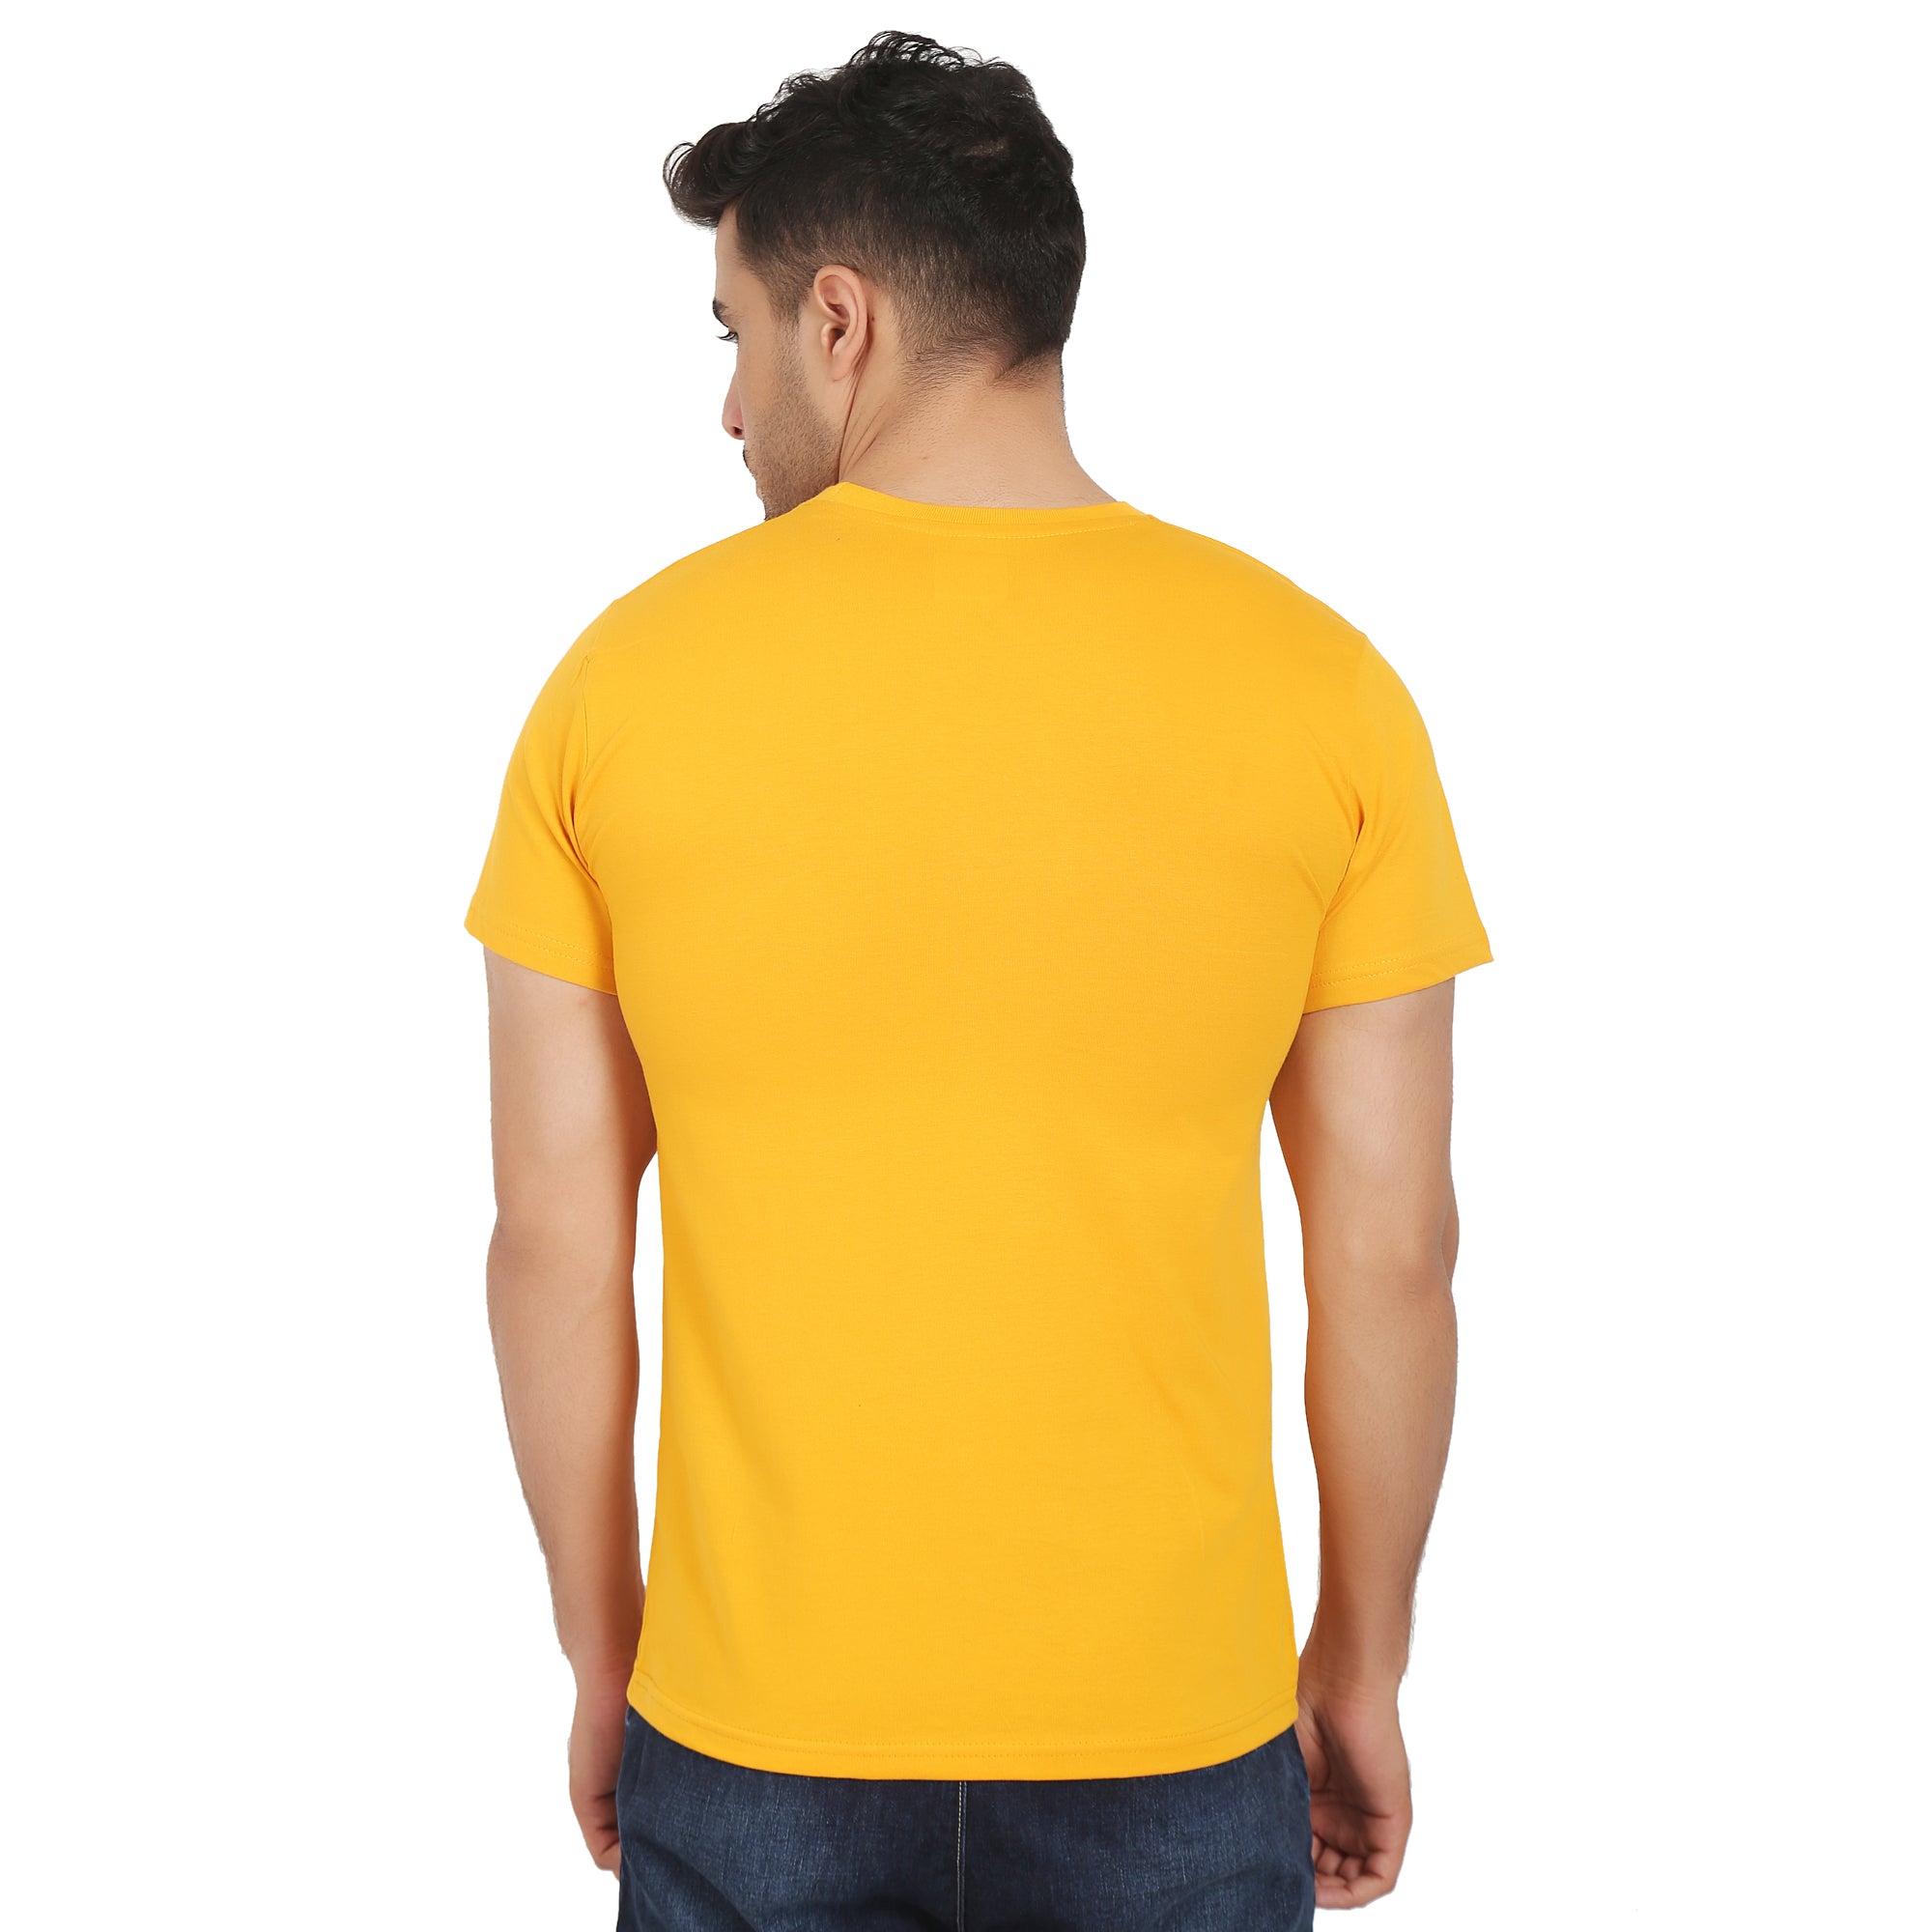 Combo Offer - Men Crew Neck Cotton T-Shirts - Half Sleeves - 3 Colors - Black, Yellow & White